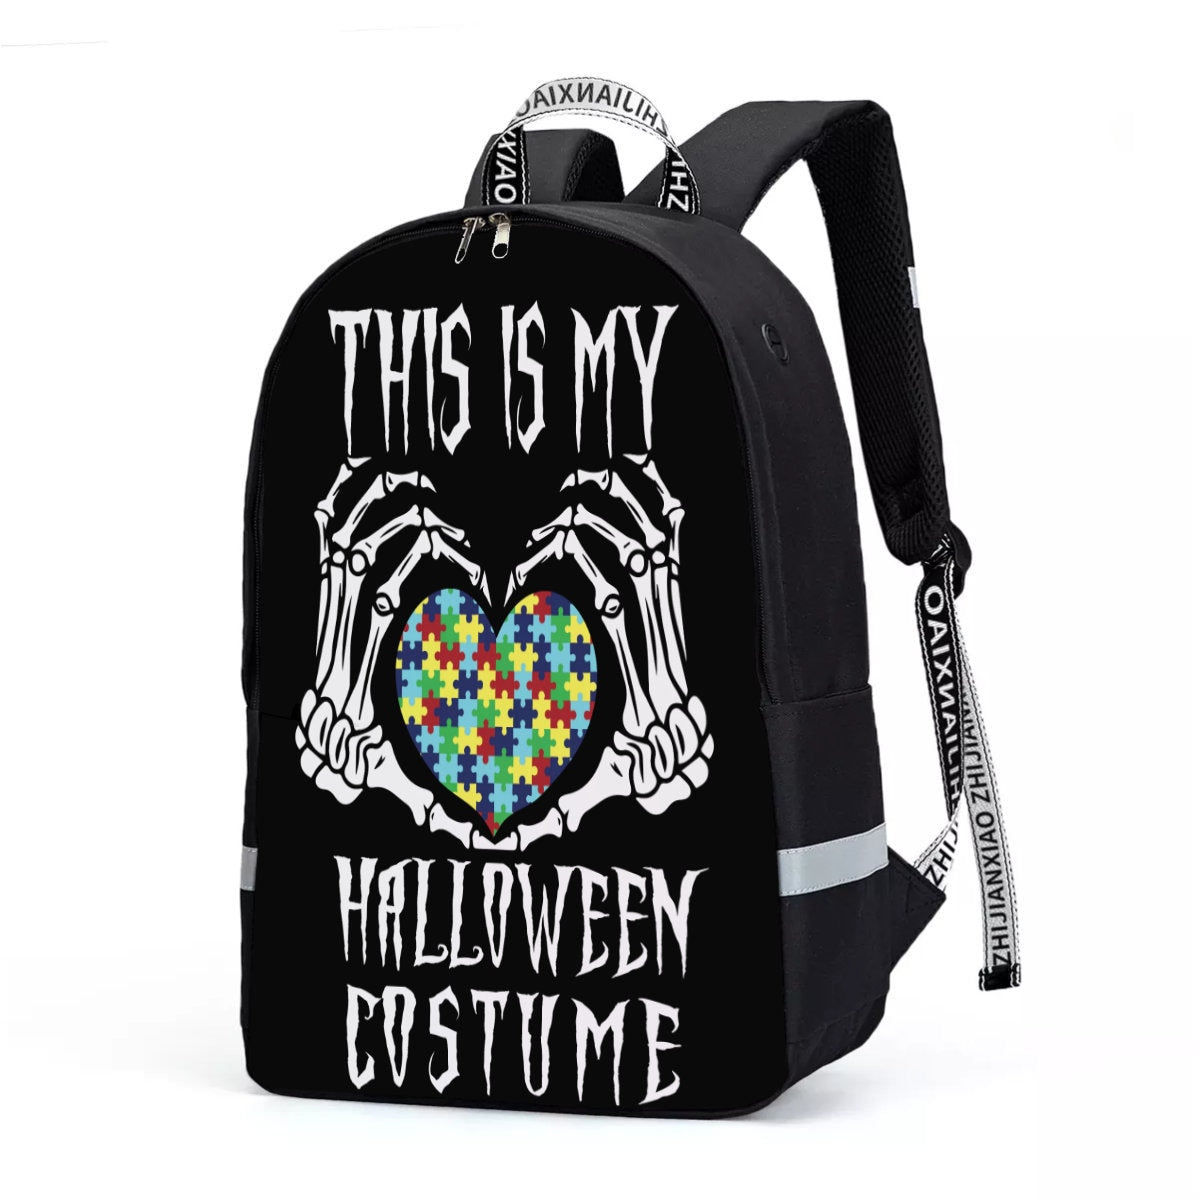 It's OK to be Different Autism Awareness Backpack With Reflective Bar - Chloe Lambertin